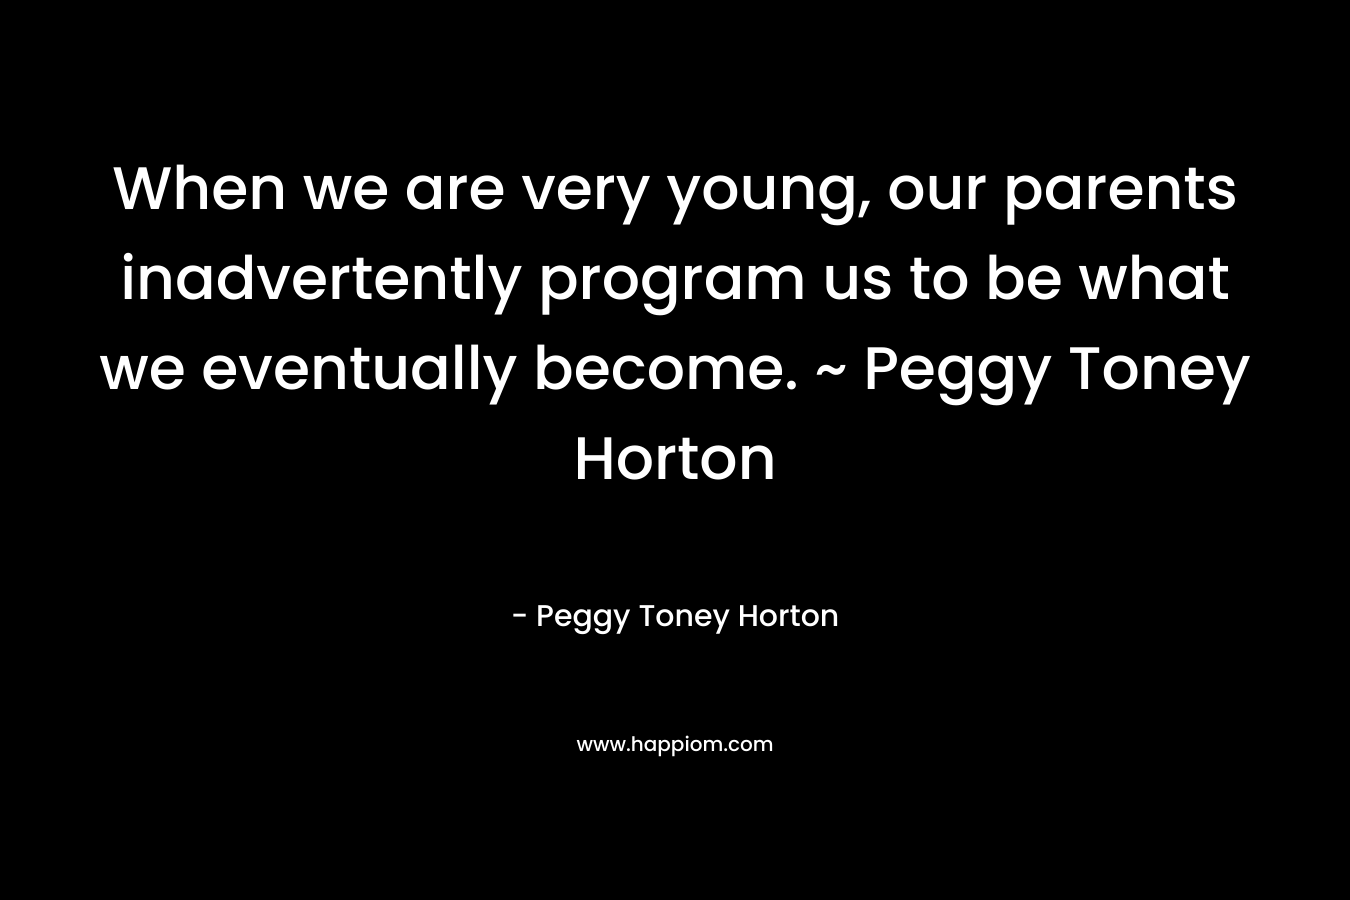 When we are very young, our parents inadvertently program us to be what we eventually become. ~ Peggy Toney Horton – Peggy Toney Horton